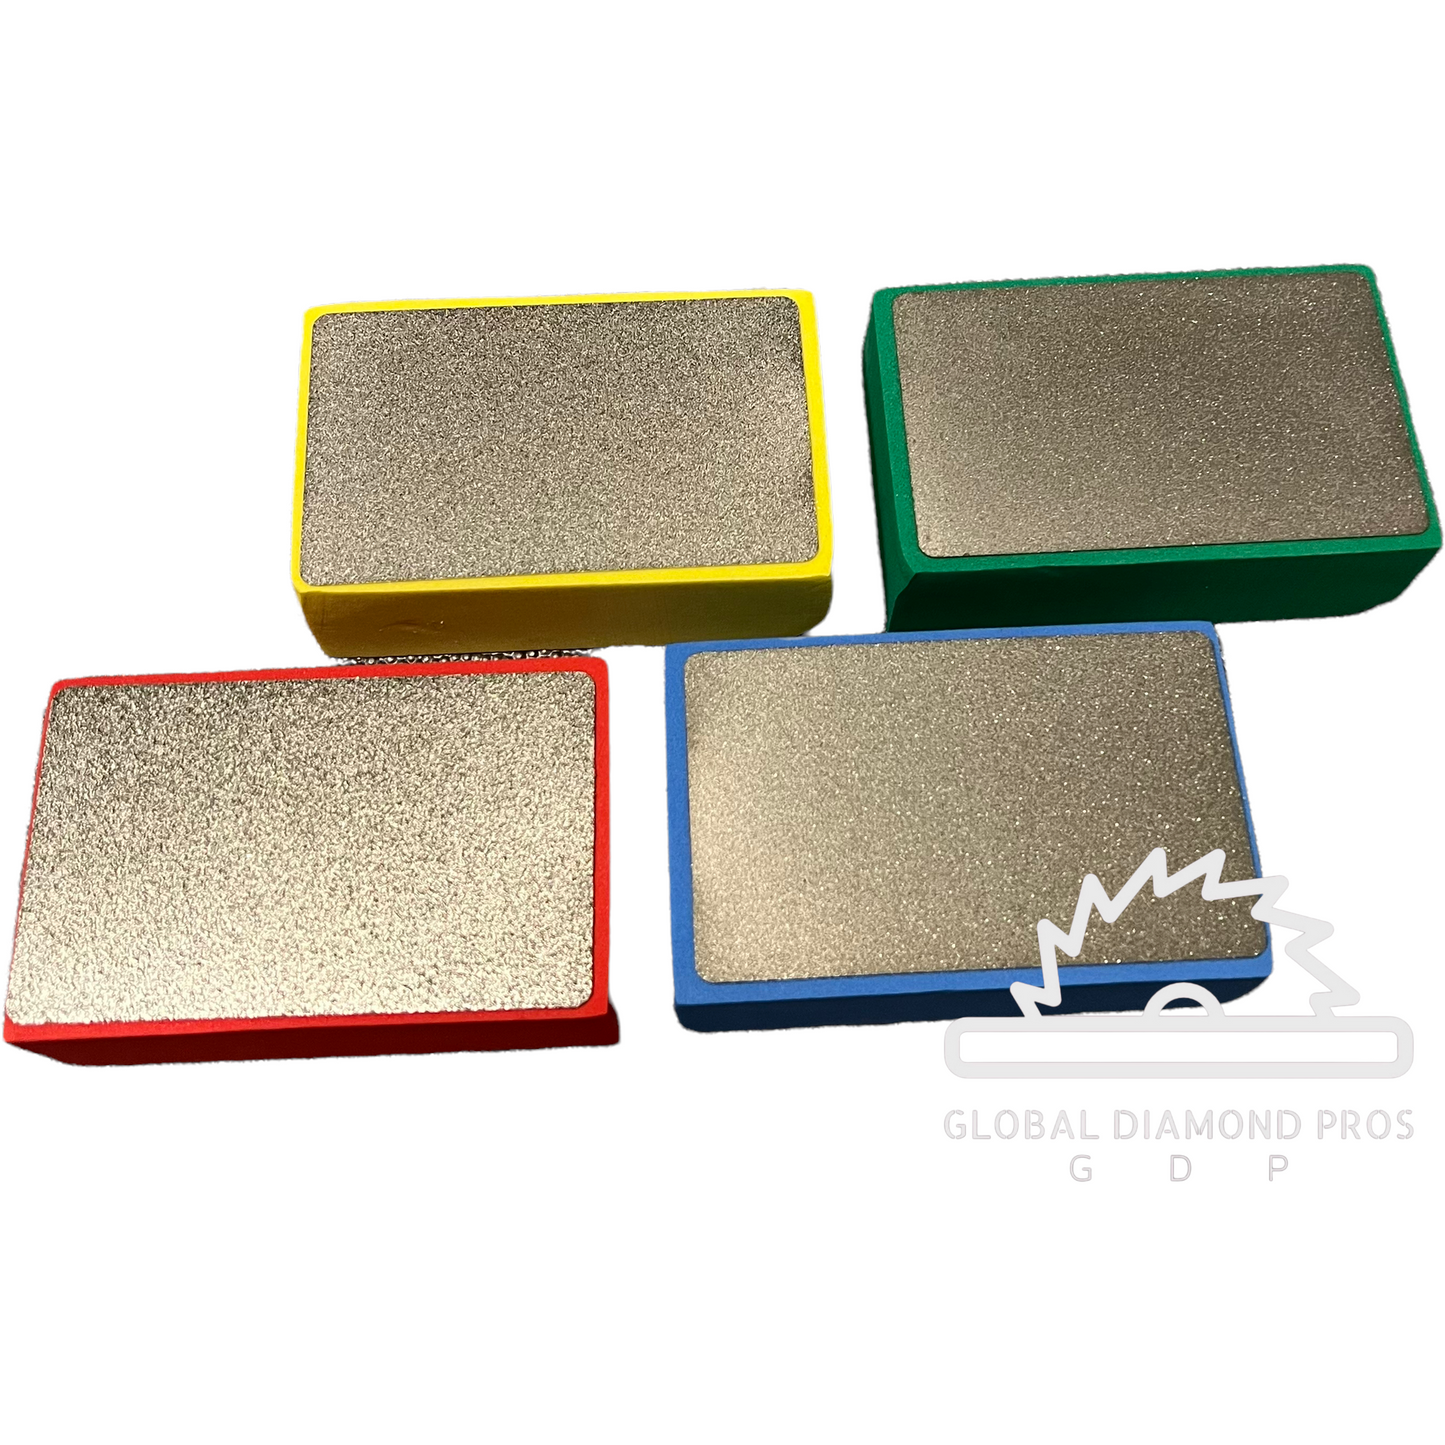 4 Pack Diamond Hand Polishing Pads for Concrete Grinding, Marble, Granite, Stone -Grit #60-#100-#200-#400